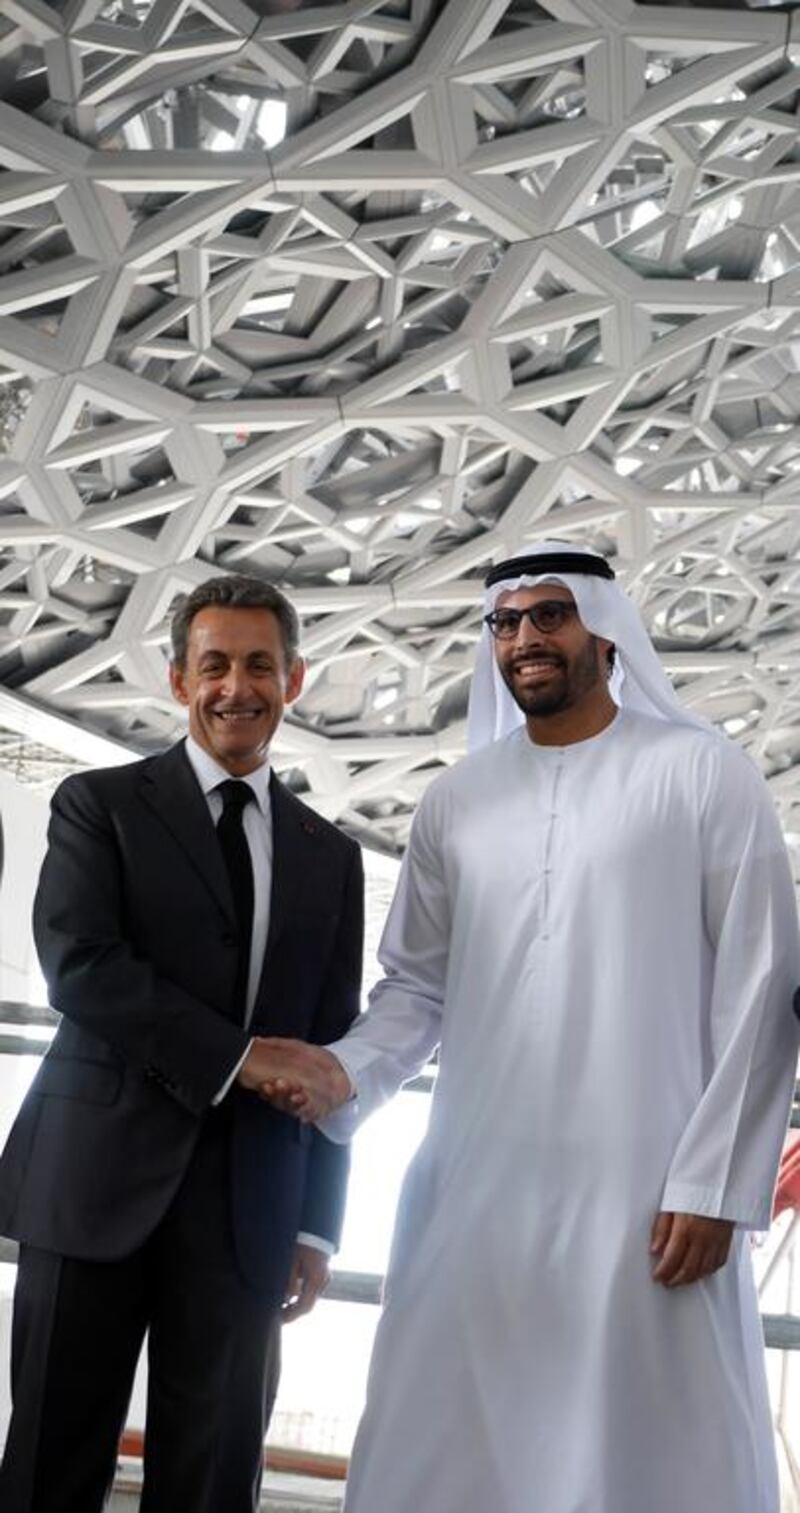 Mohammed Al Mubarak, Chairman of Abu Dhabi Tourism & Culture Authority welcomes Nicolas Sarkozy, former French president for a tour of the Louvre Abu Dhabi's construction site on Wednesday. Courtesy TDIC